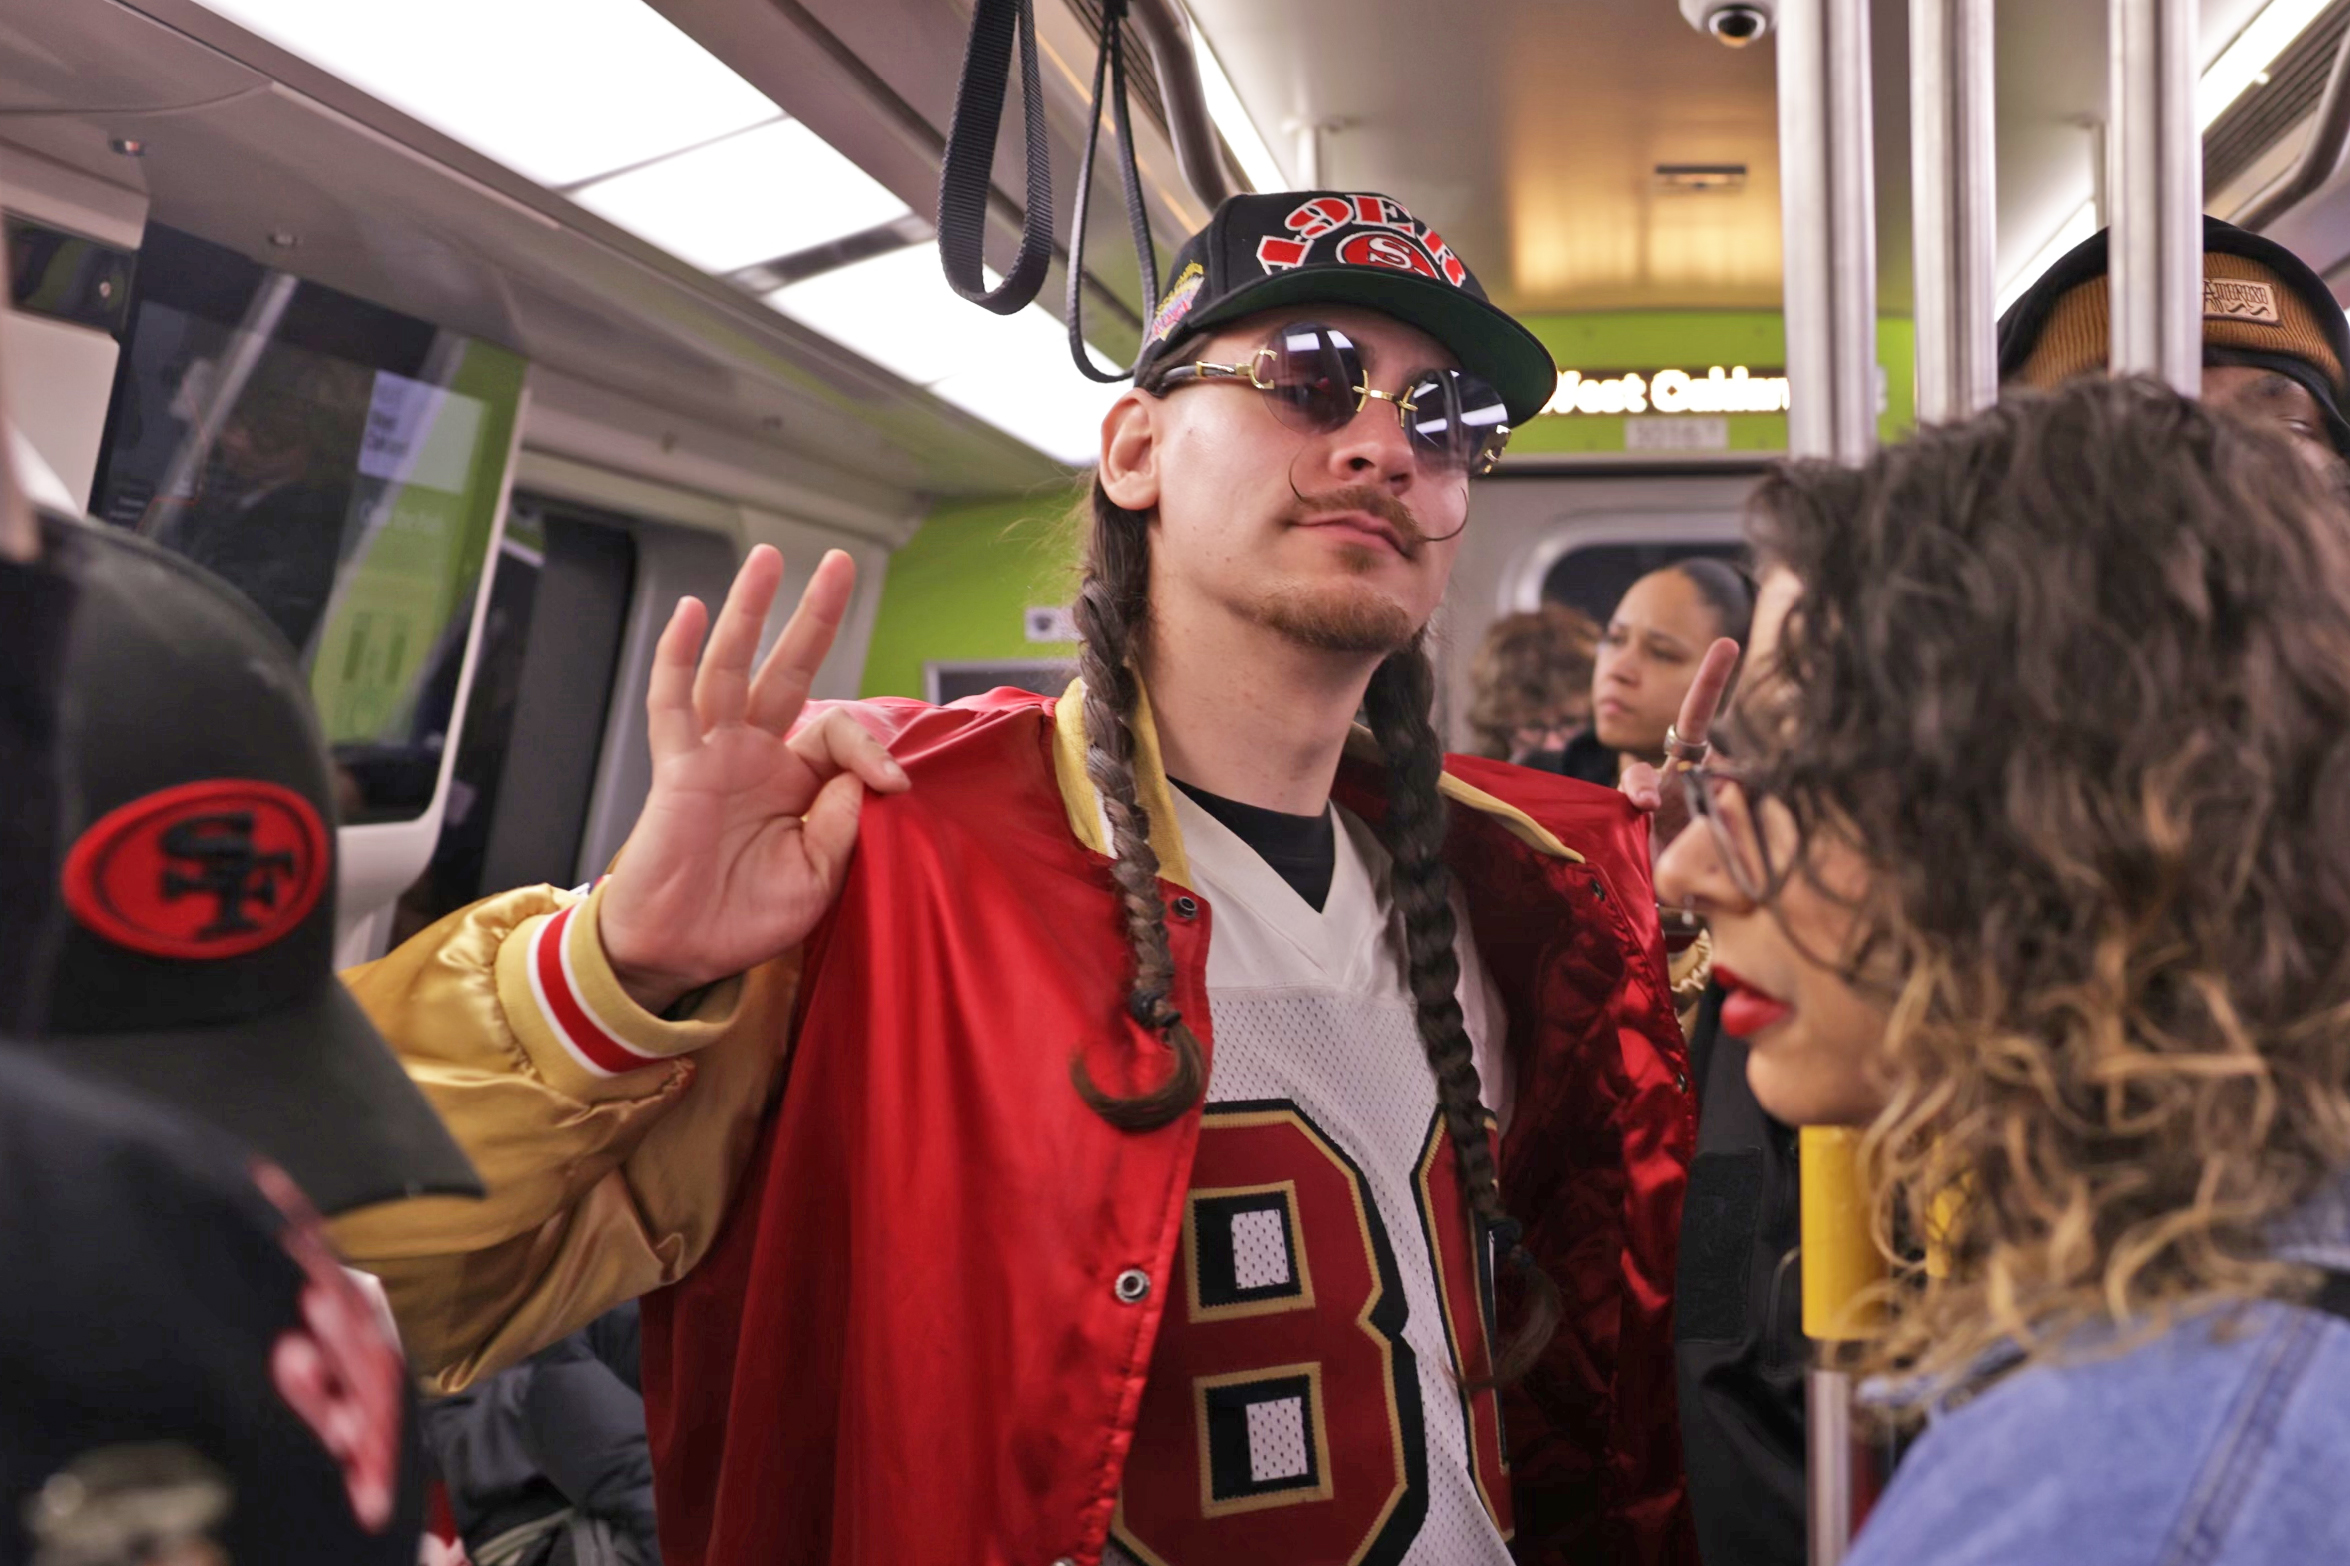 A man in a red and gold varsity jacket, wearing sunglasses, raises a peace sign on a crowded train.